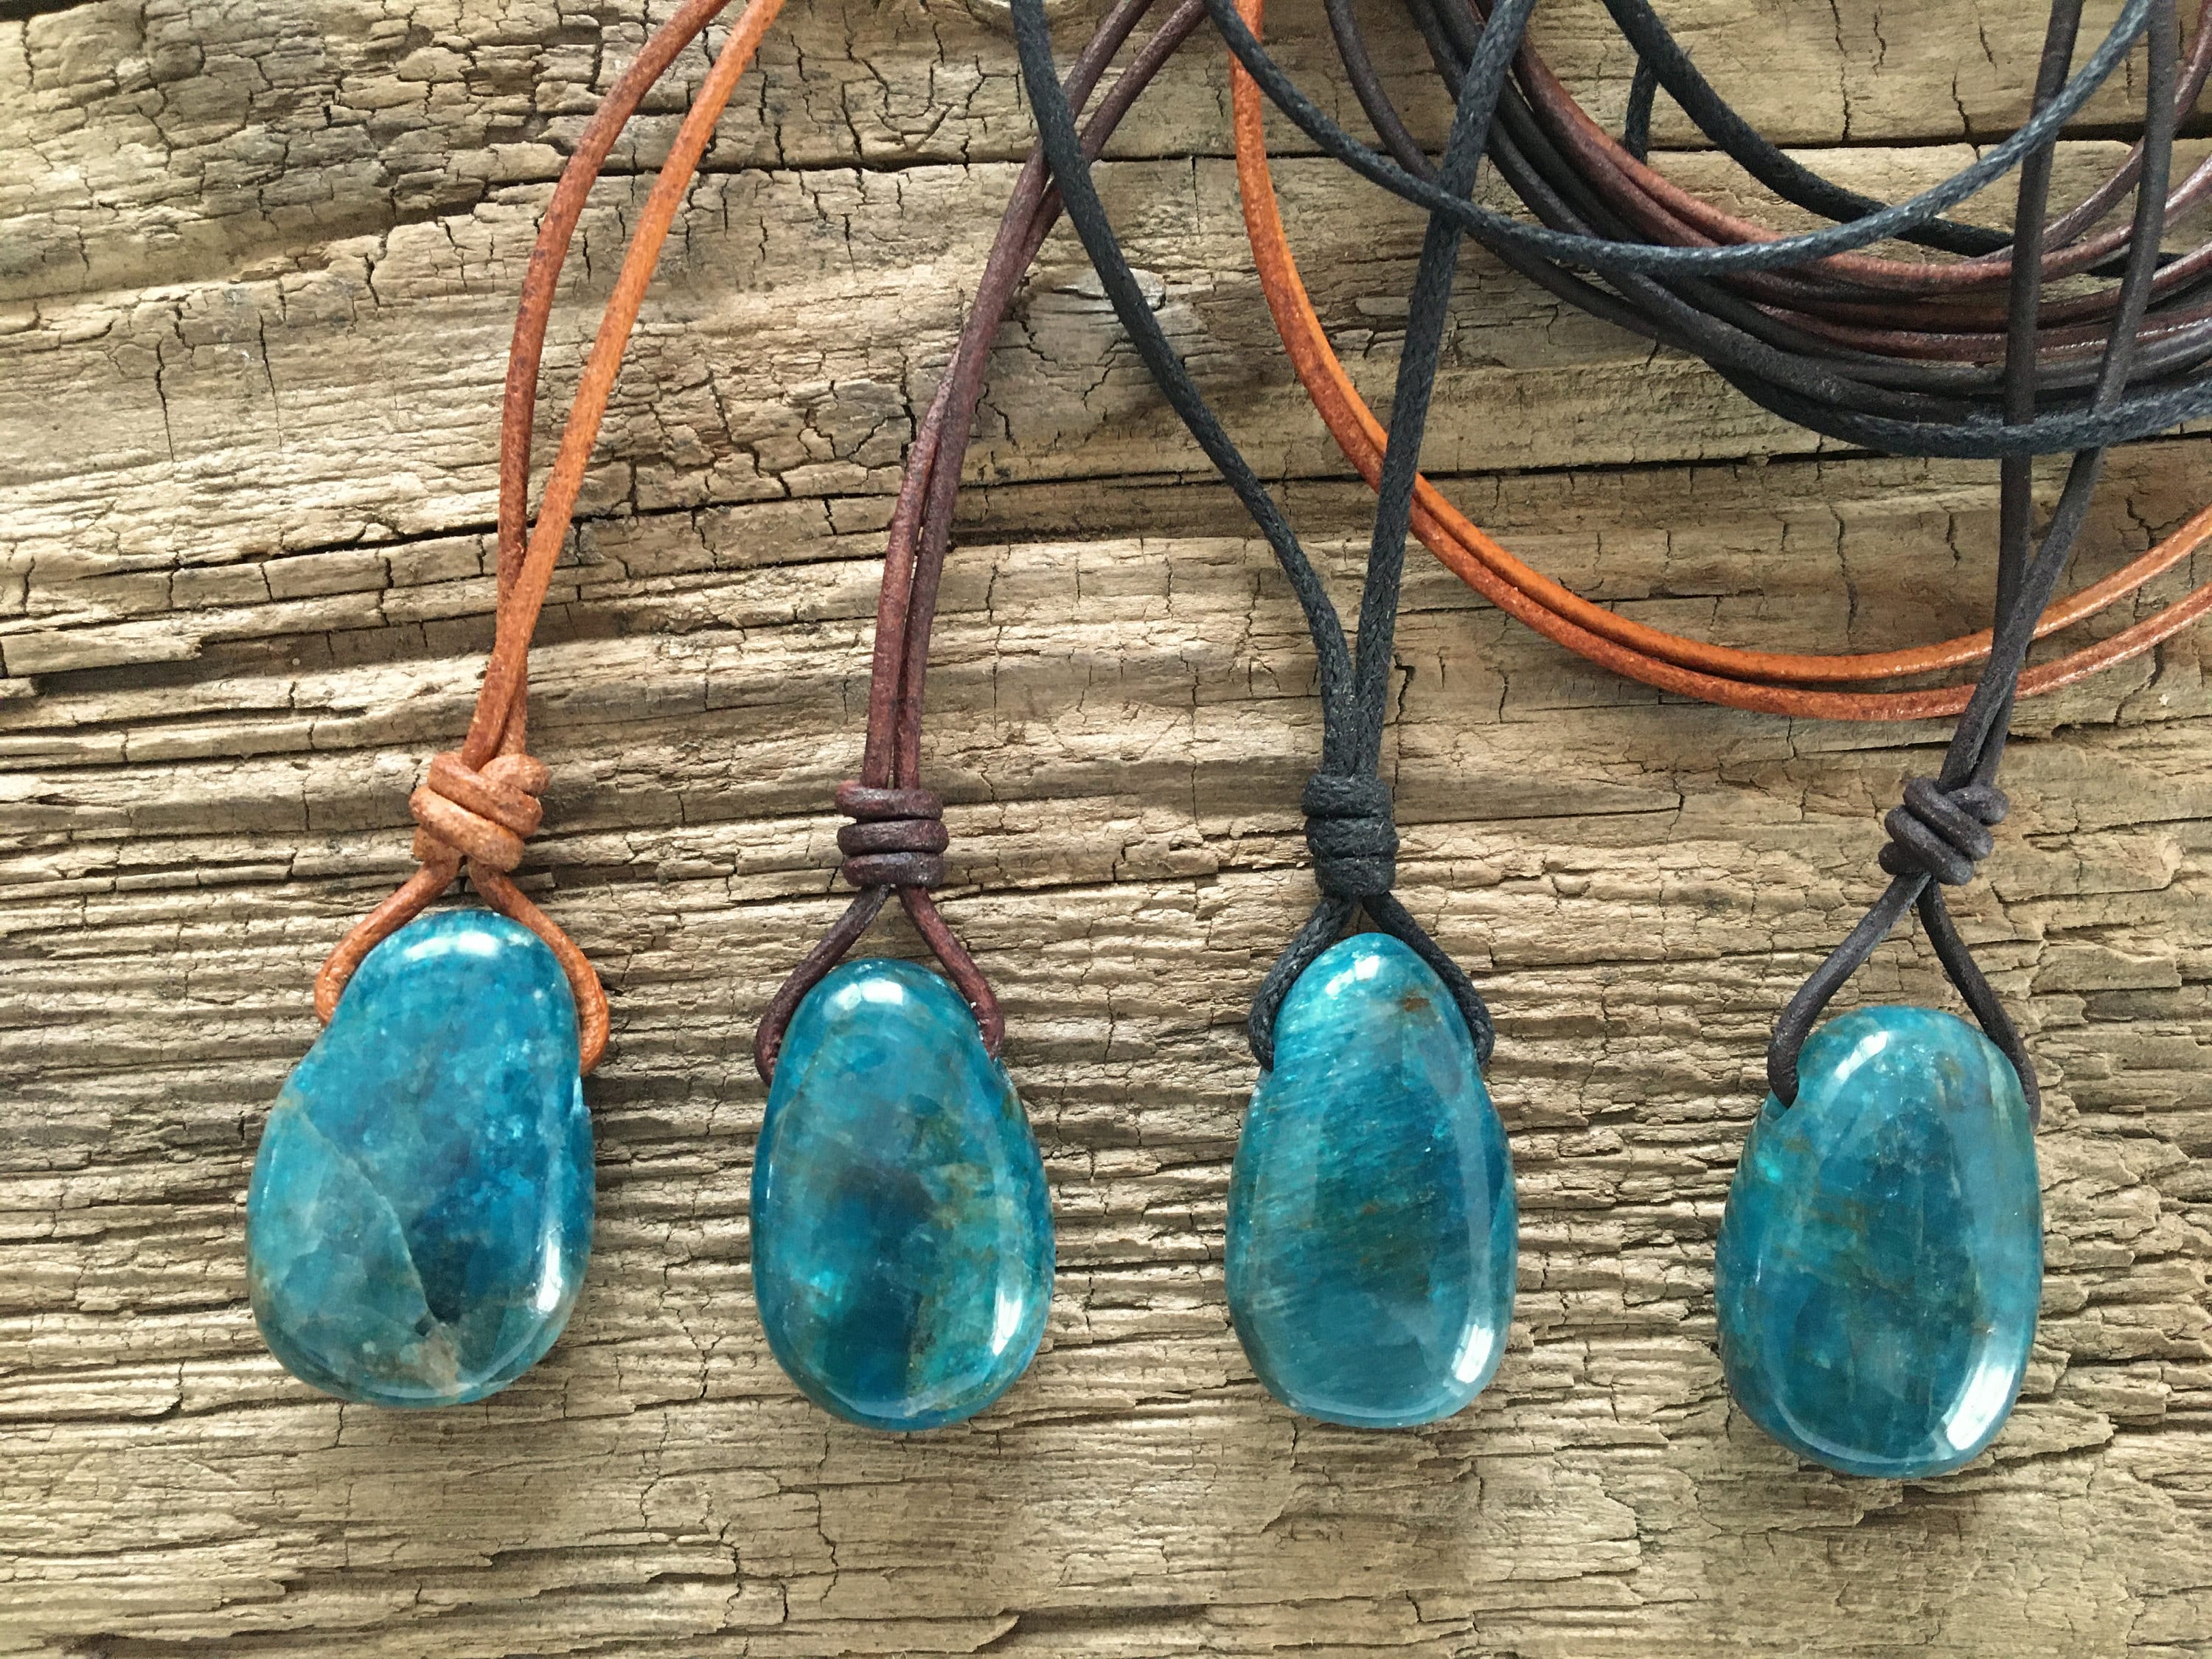 Braided Leather Cord Necklace - Stone Treasures by the Lake